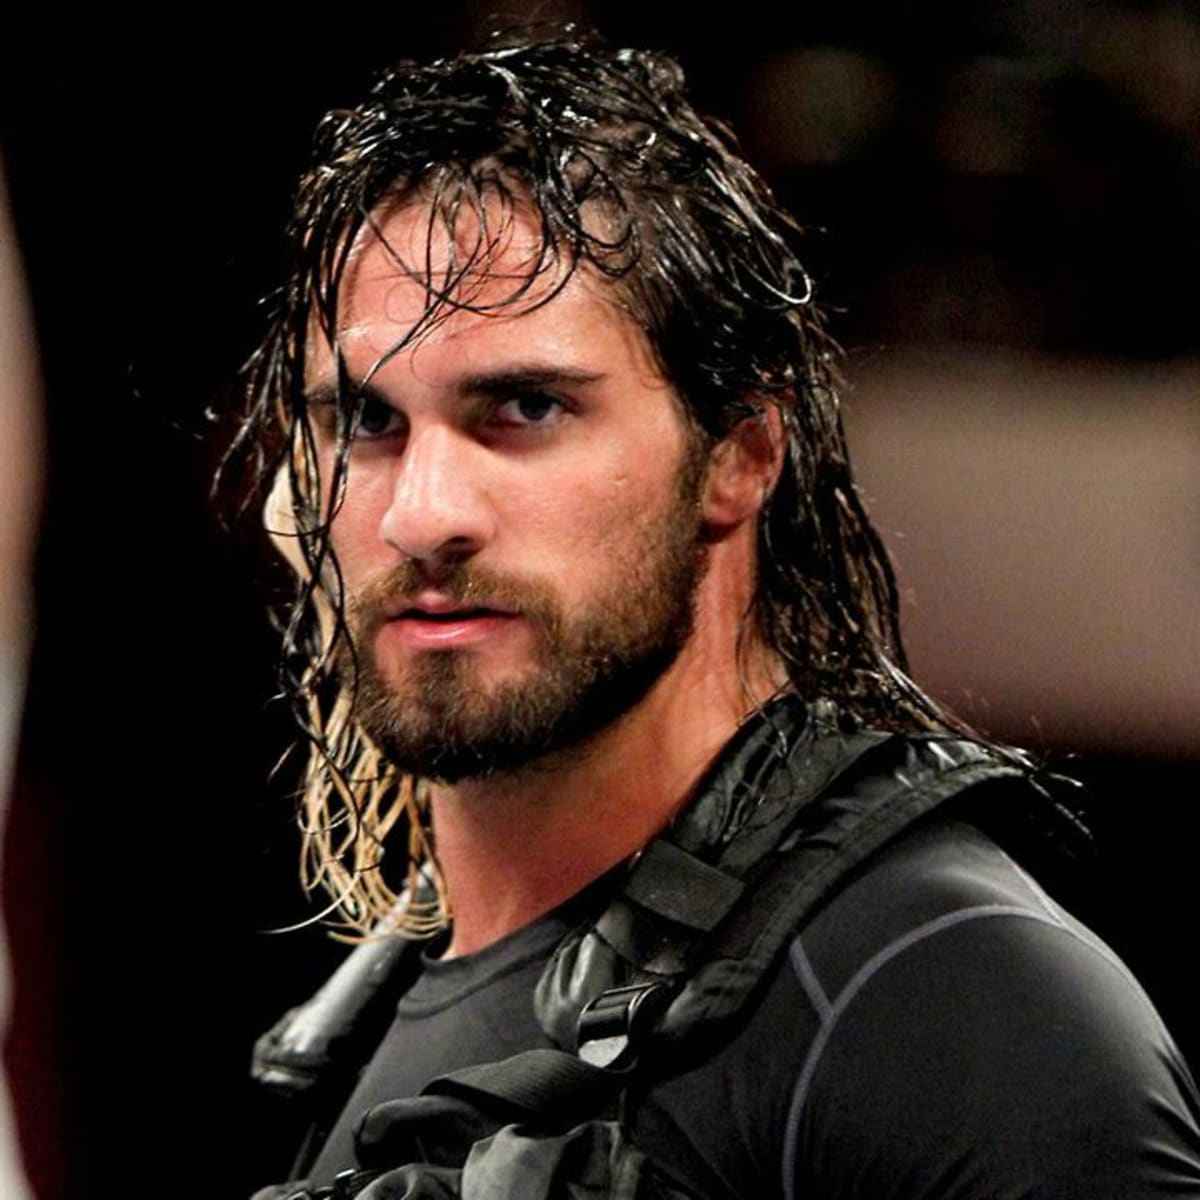 Seth Rollins Reportedly Dealing With Injury, Could Miss In-Ring Time